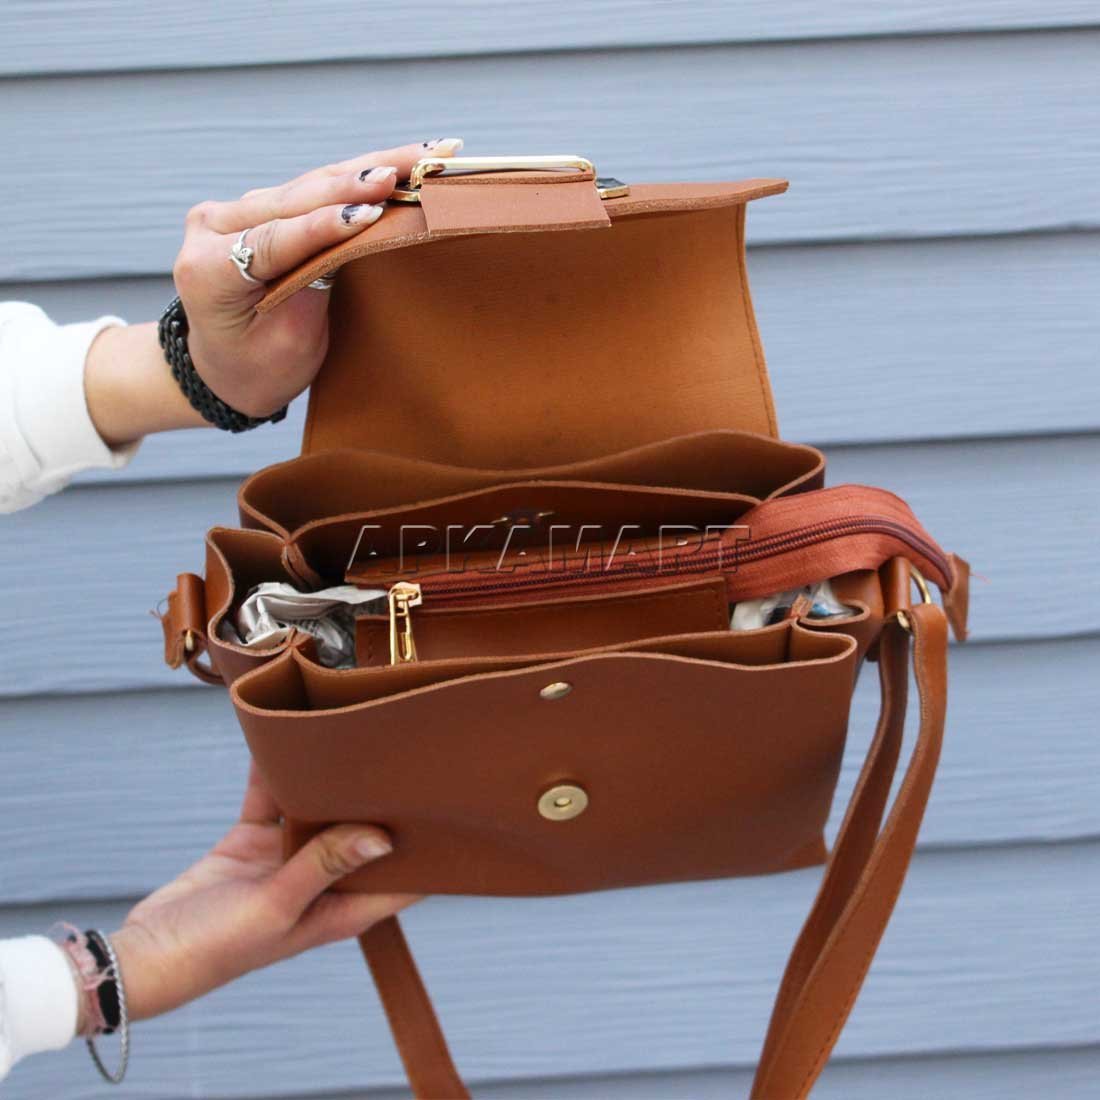 Types of Hand bags every college going girl should own